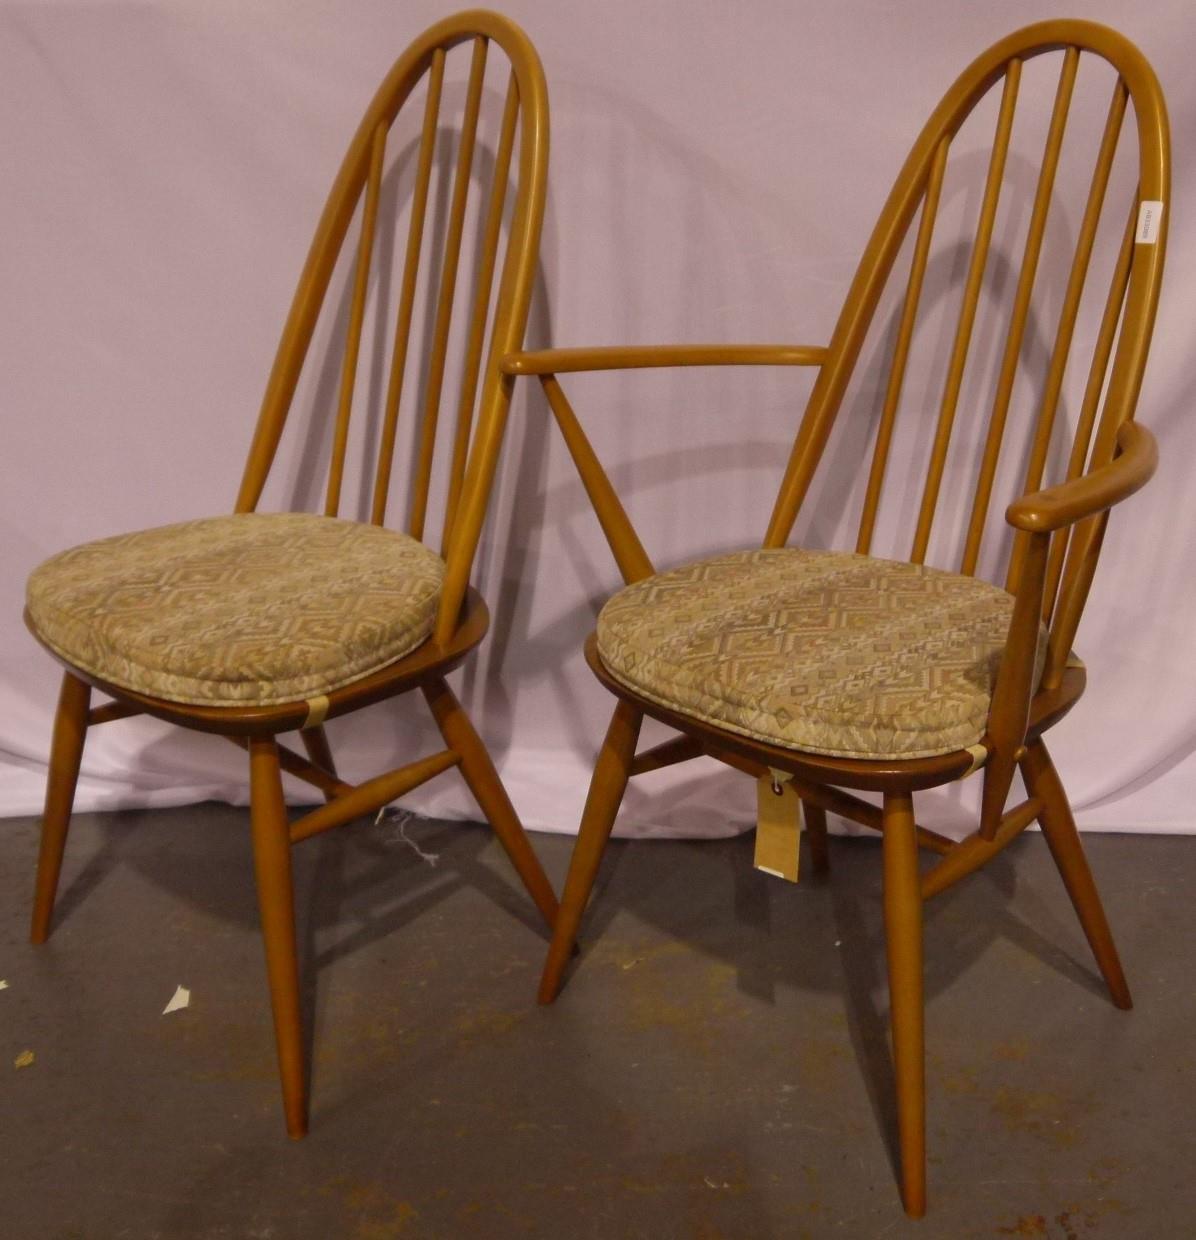 A set of six (4+2) Ercol Windsor stick-back dining chairs with upholstered seat cushions.